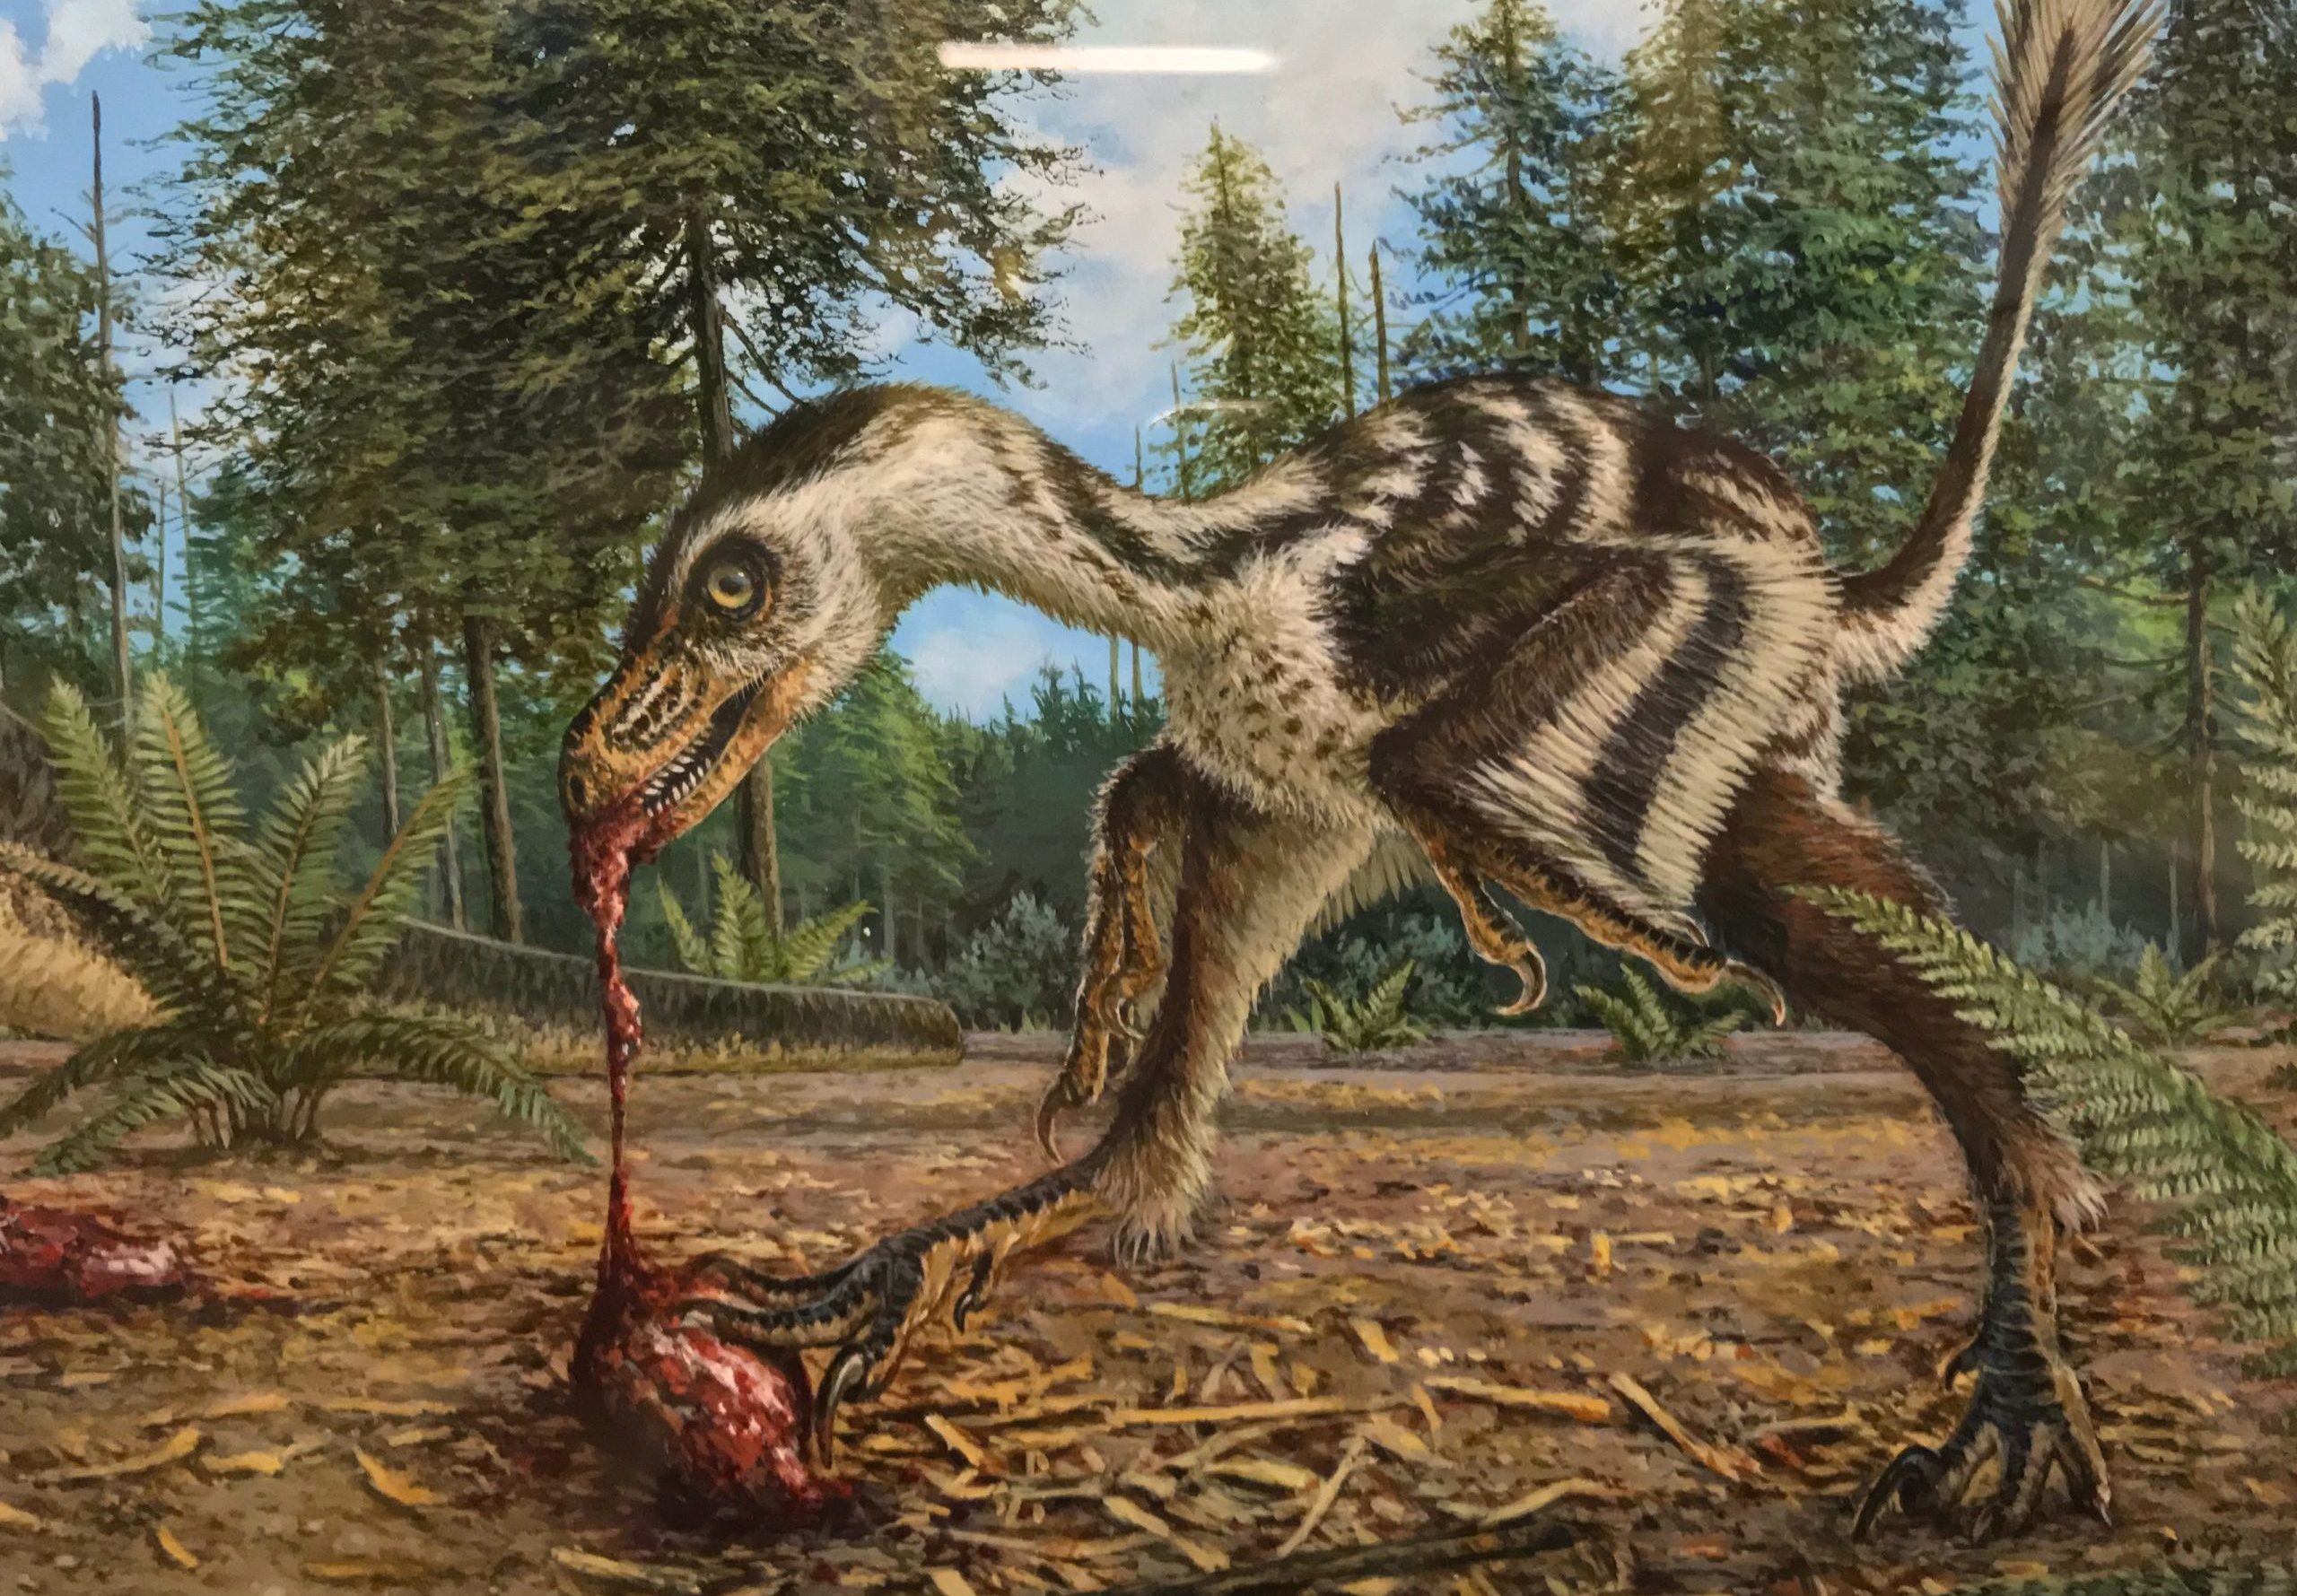 Michael Skrepnick's illustration of the Bambiraptor feasting on a small animal.